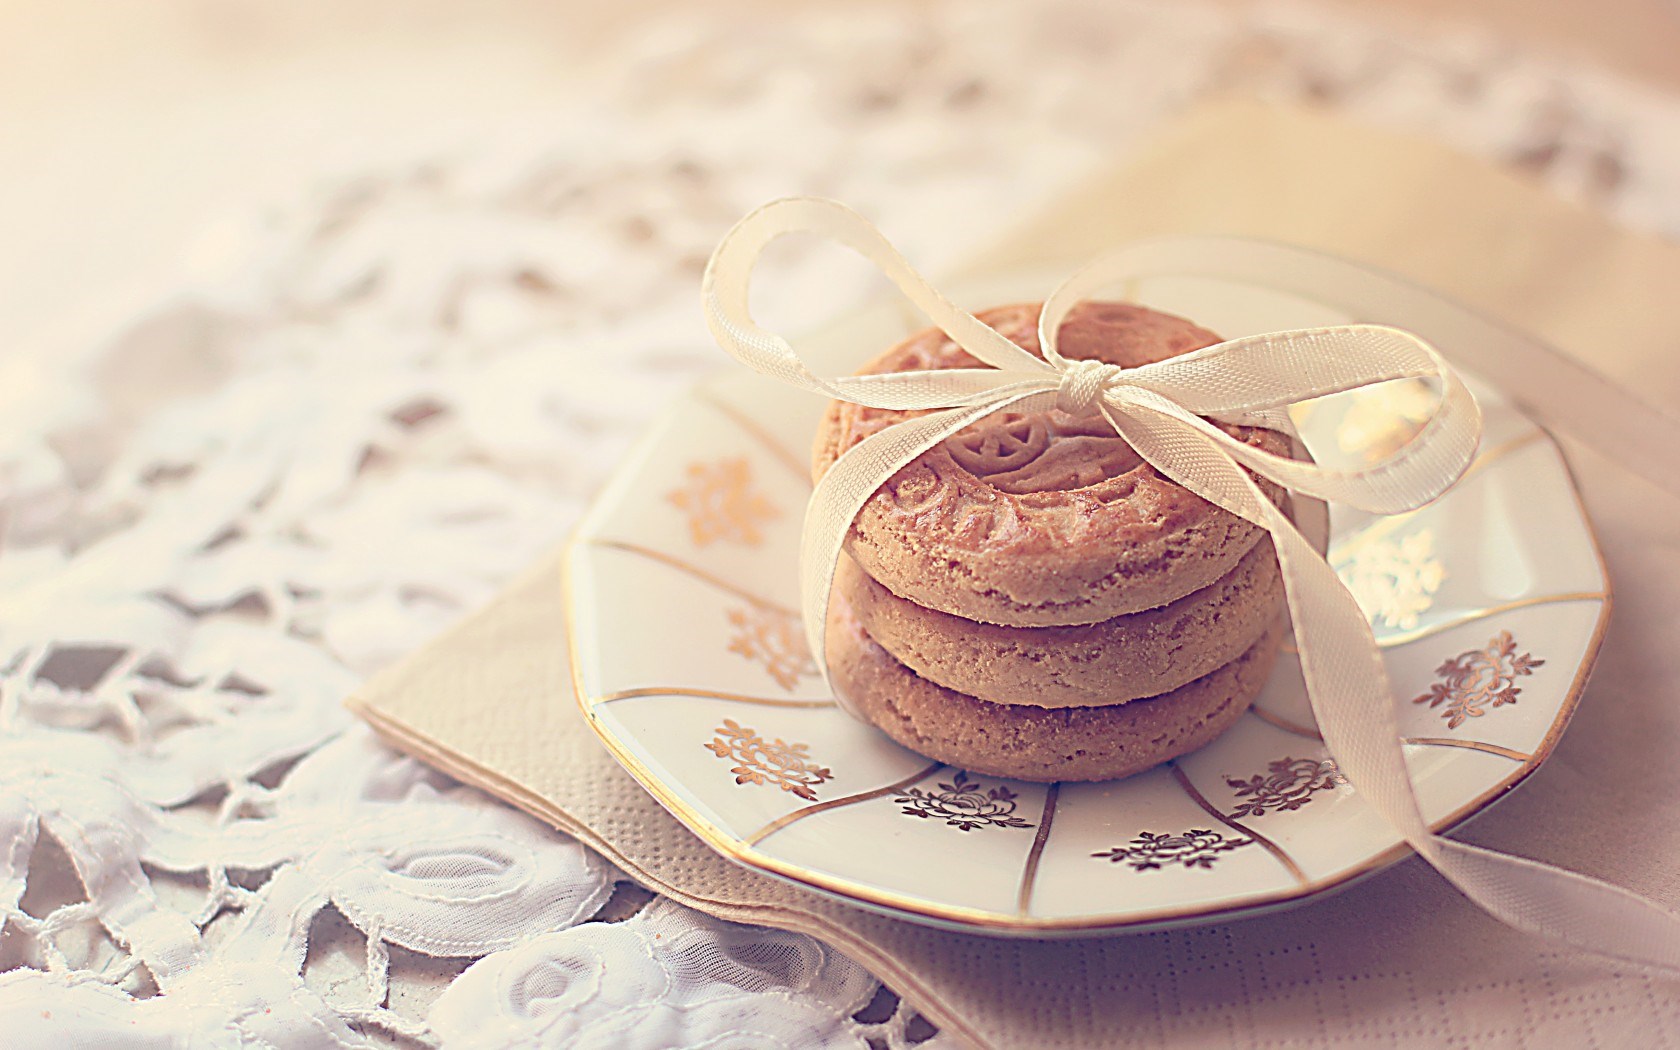 Cookies Background Wallpaper High Definition Quality